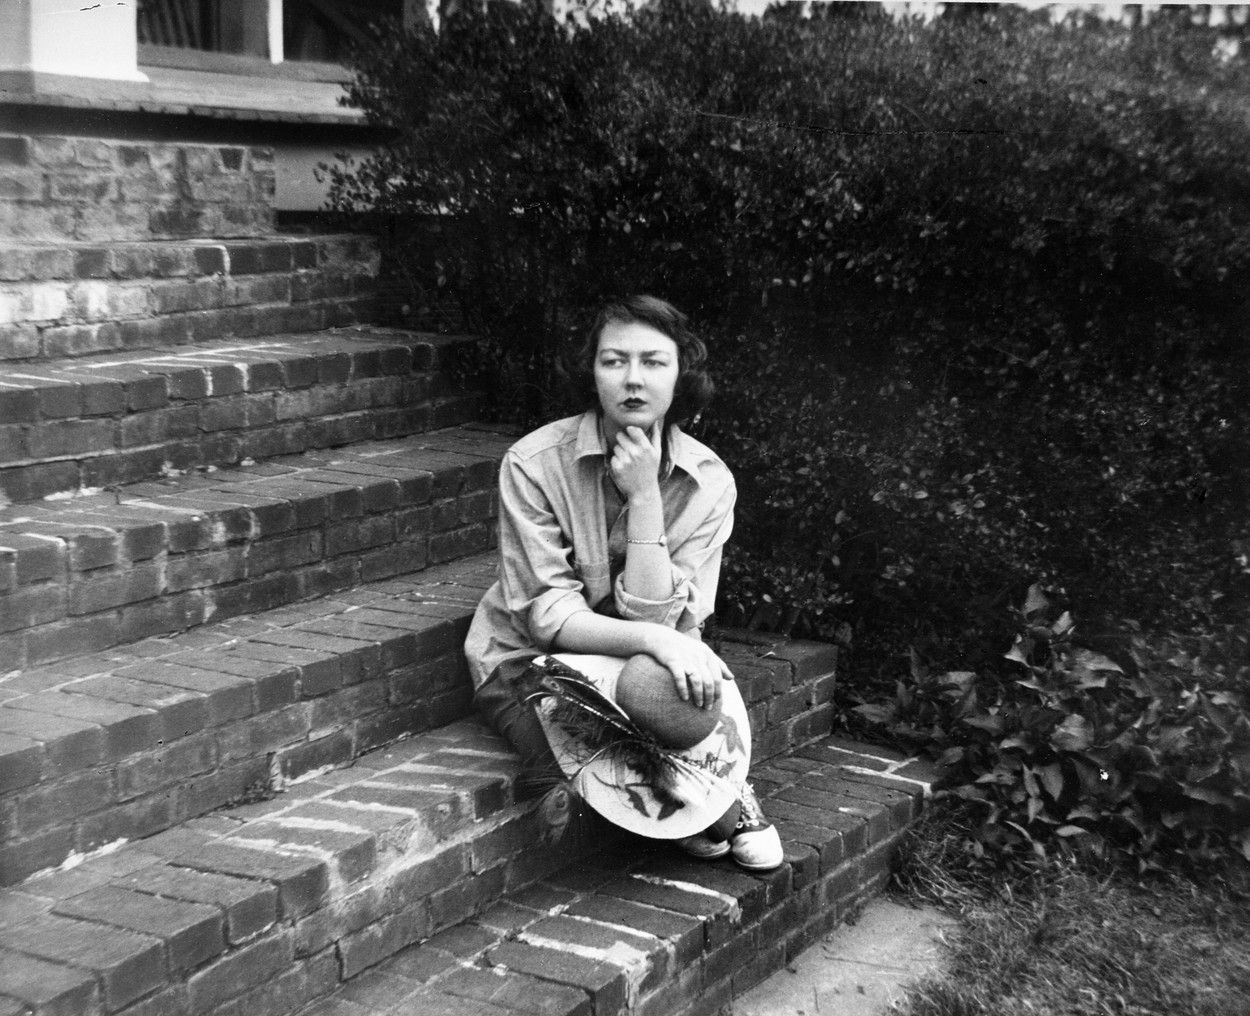 Flannery O'Connor, 1959